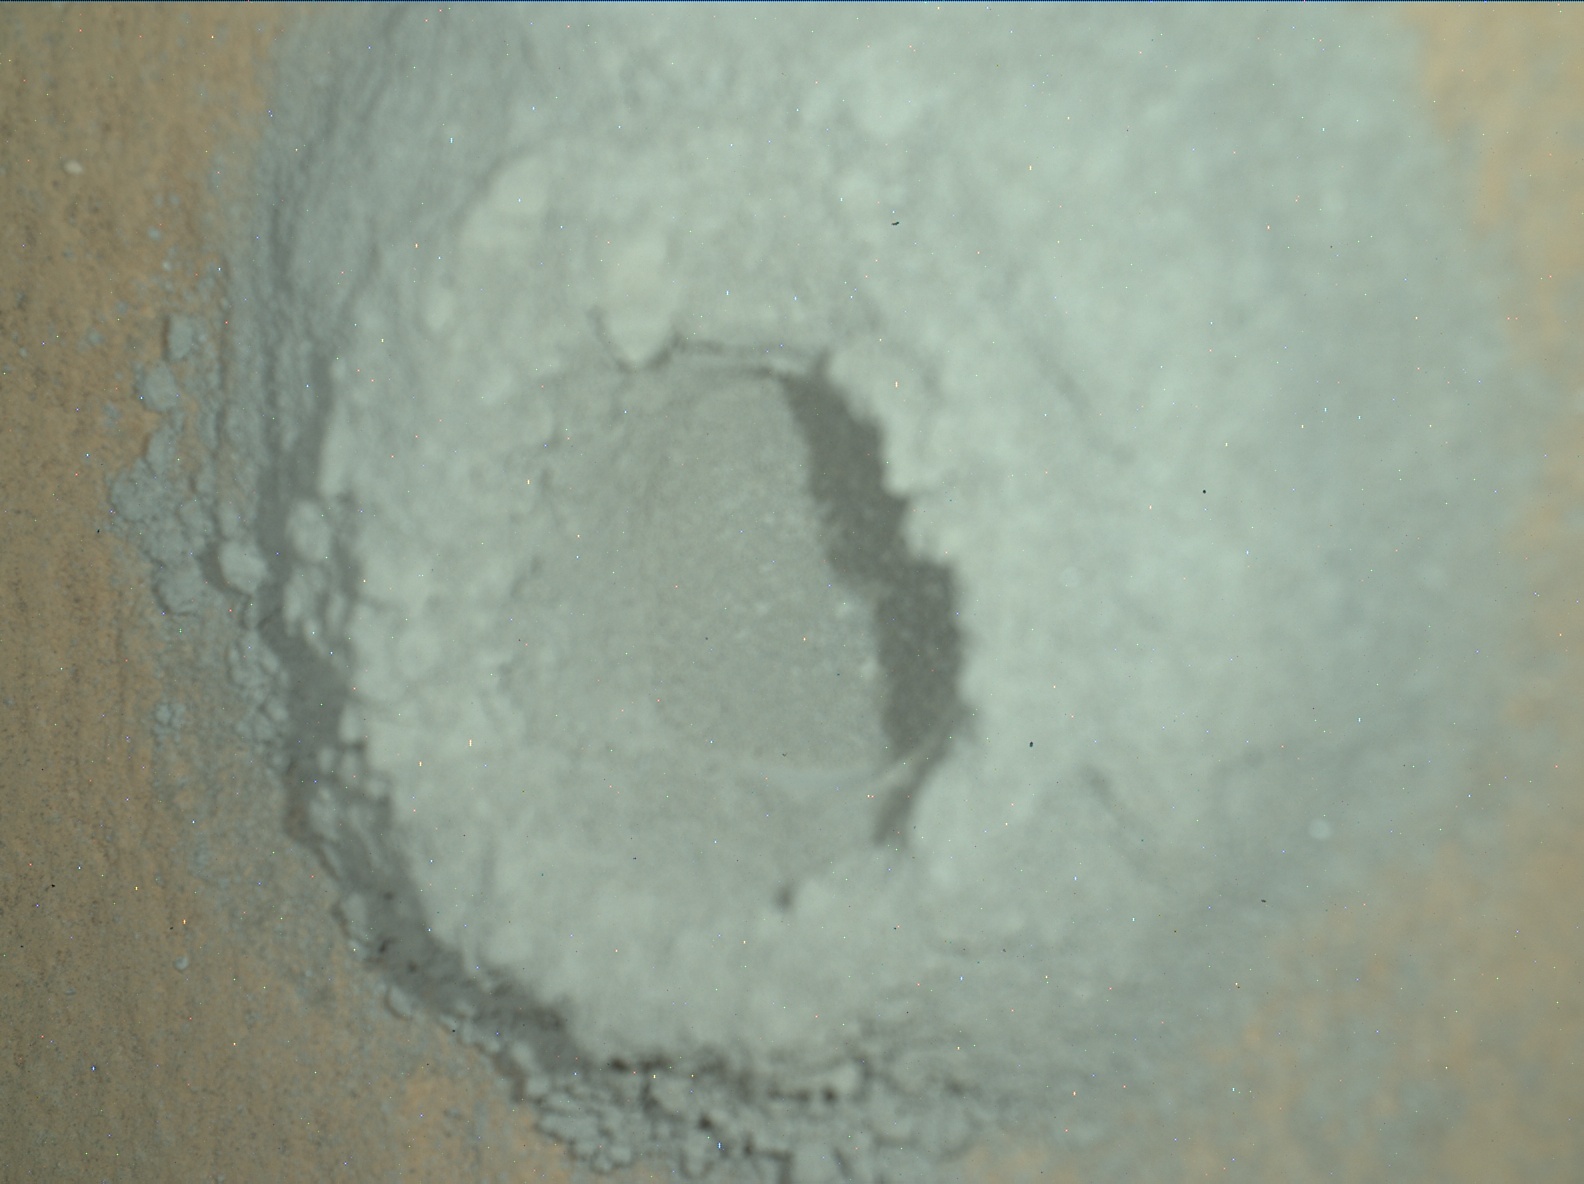 Nasa's Mars rover Curiosity acquired this image using its Mars Hand Lens Imager (MAHLI) on Sol 2727